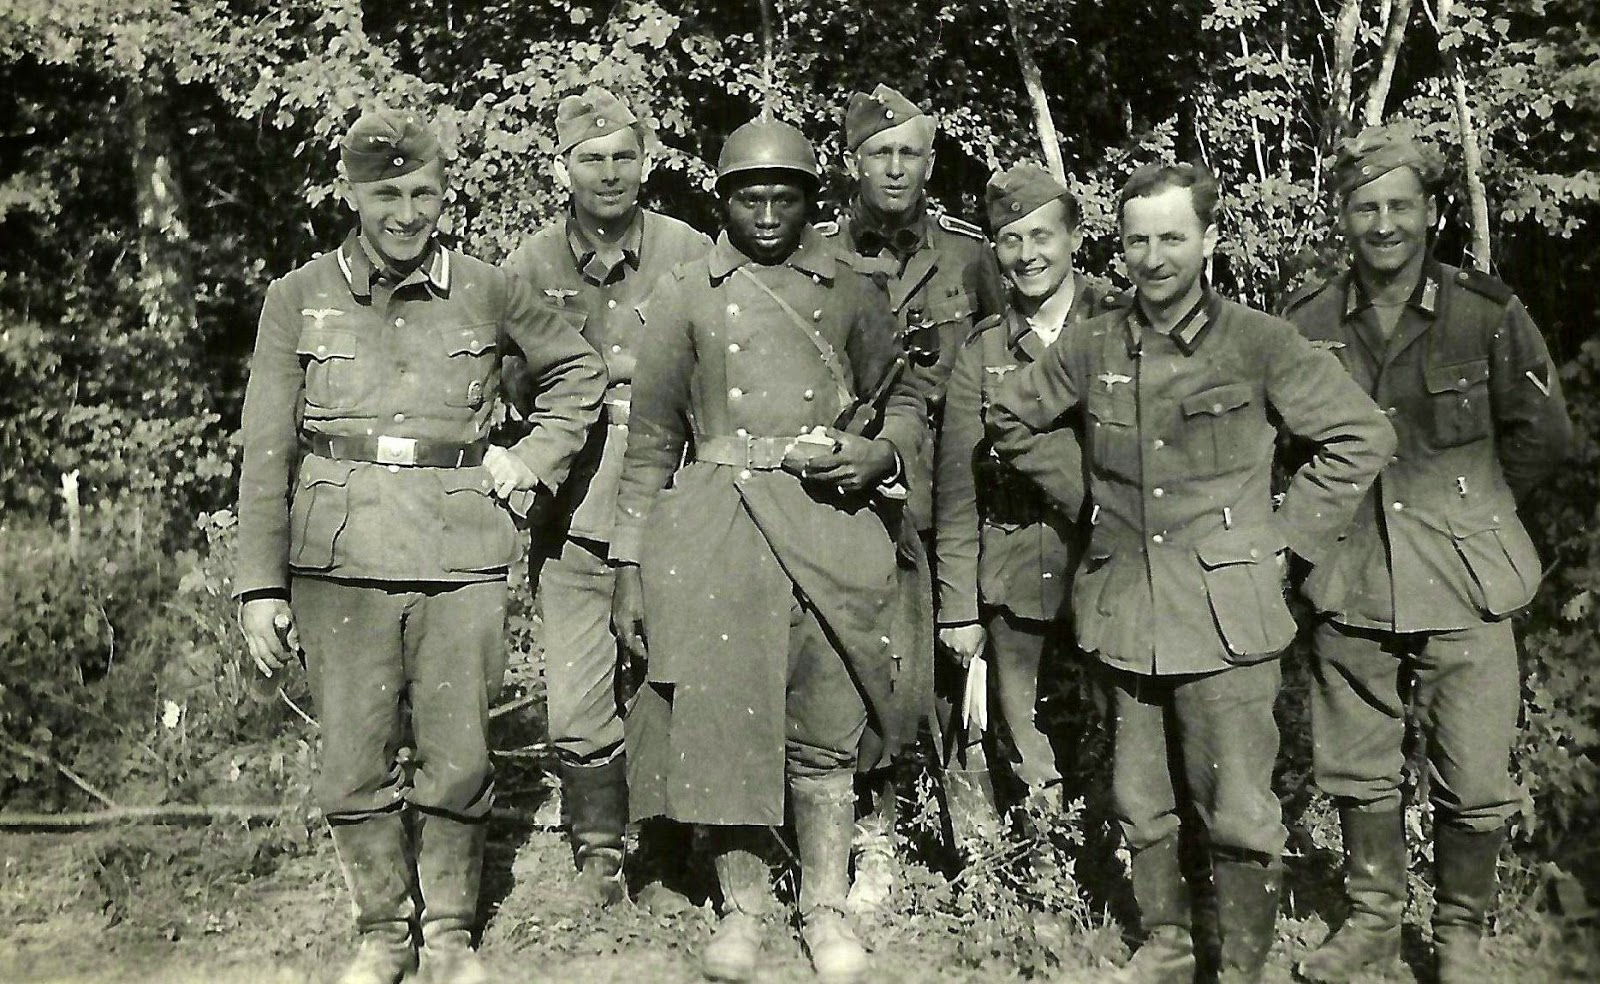 Ultimate Collection Of Rare Historical Photos. A Big Piece Of History (200 Pictures) - Germans posing